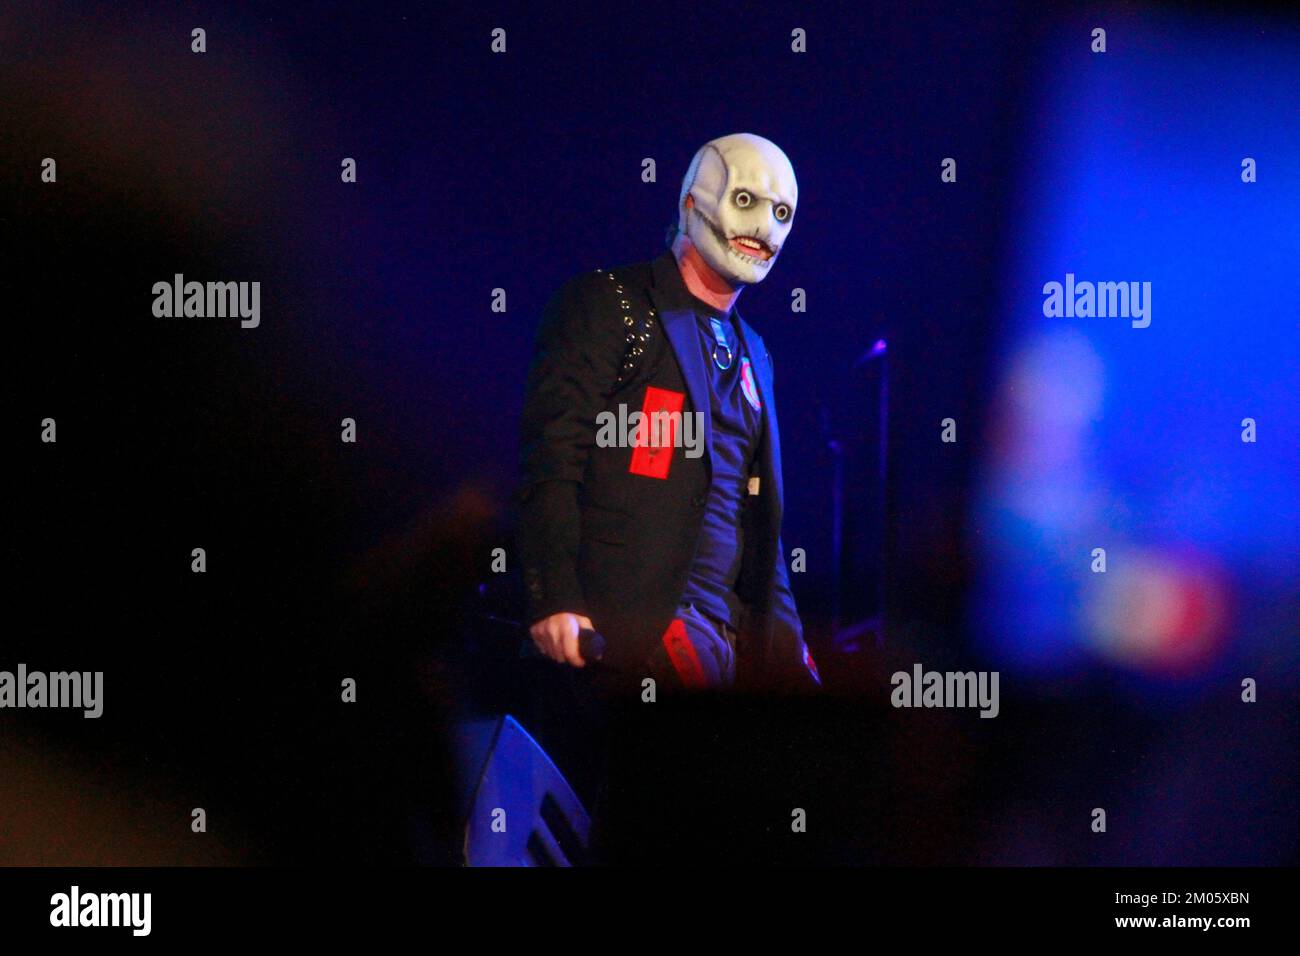 December 03, 2022, Toluca, Mexico: Corey Taylor lead vocalist of the   American band Slipknot performs on stage during  the second day of the Hell and Heaven Metal Fest at Foro Pegaso. On December 03, 2022 in Toluca, Mexico. (Photo by Carlos Santiago/ Eyepix Group) Stock Photo